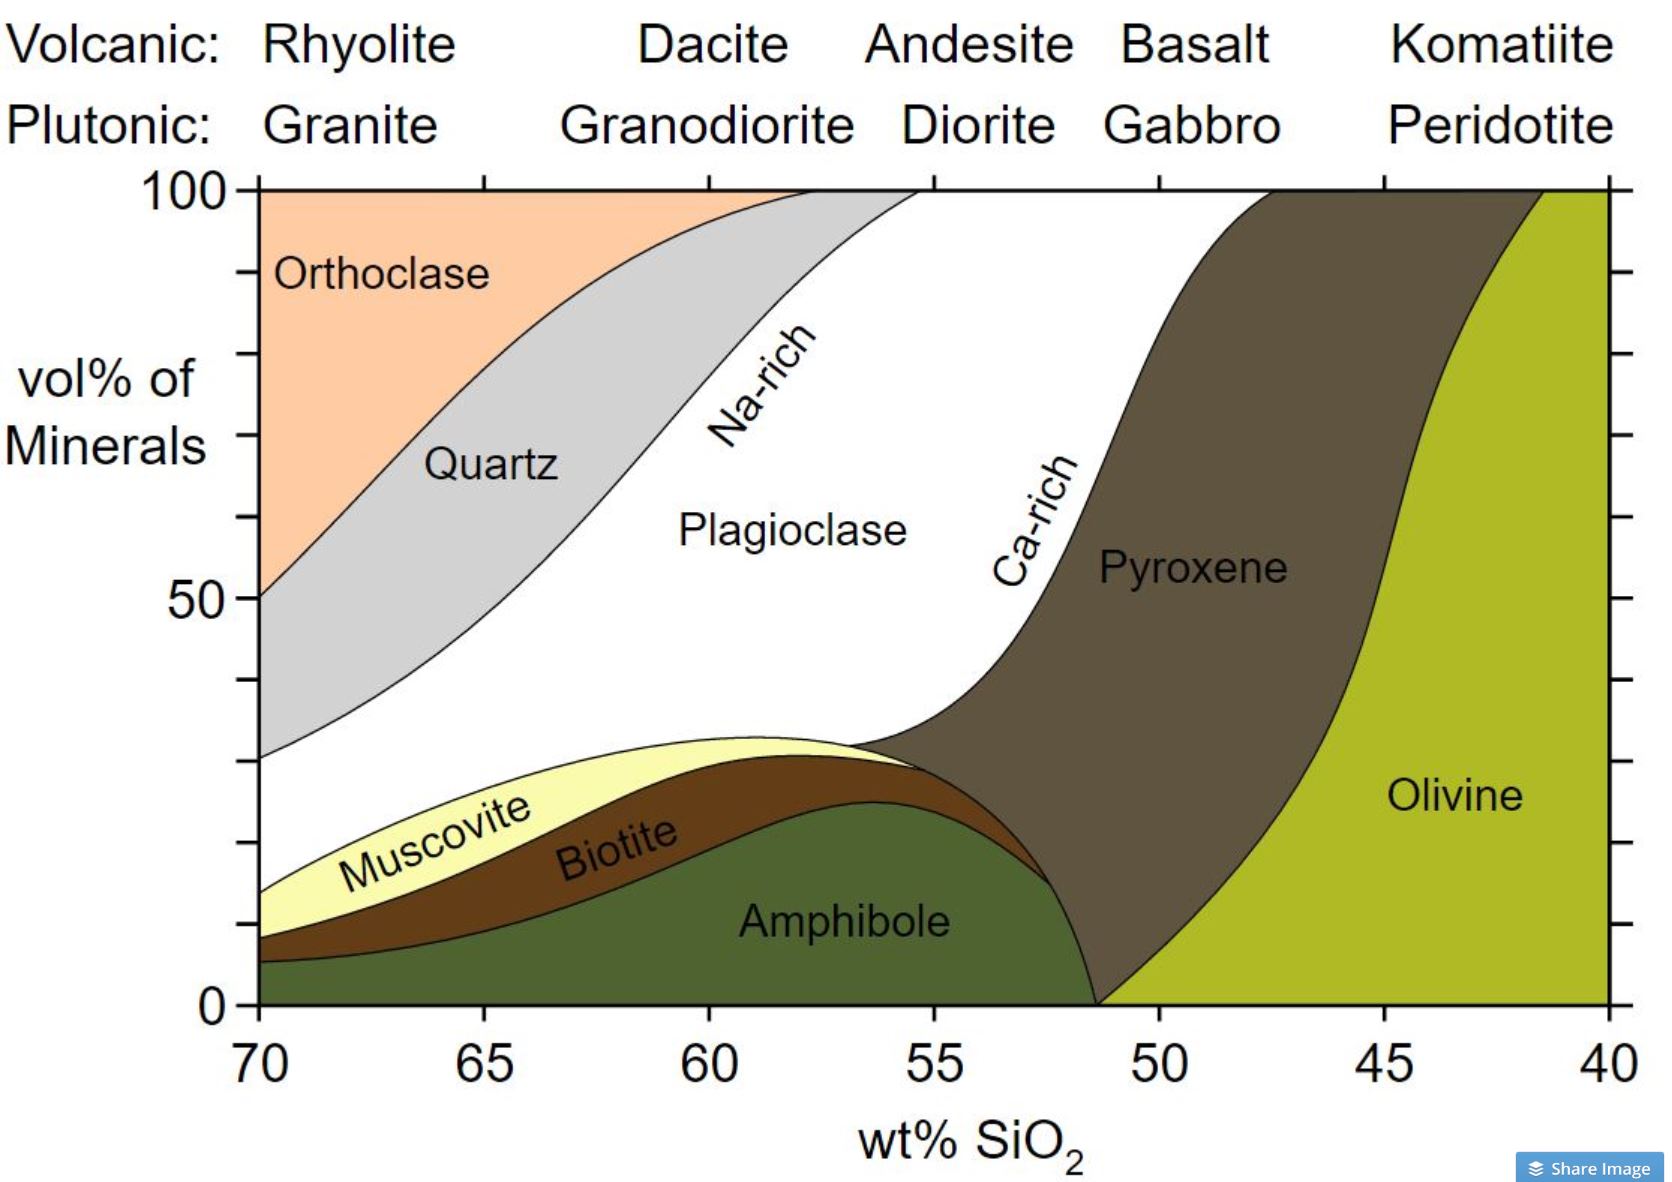 Diagram showing the mineral composition of the four classes of igneous rocks, ultramafic, mafic, intermediate, and felsic.